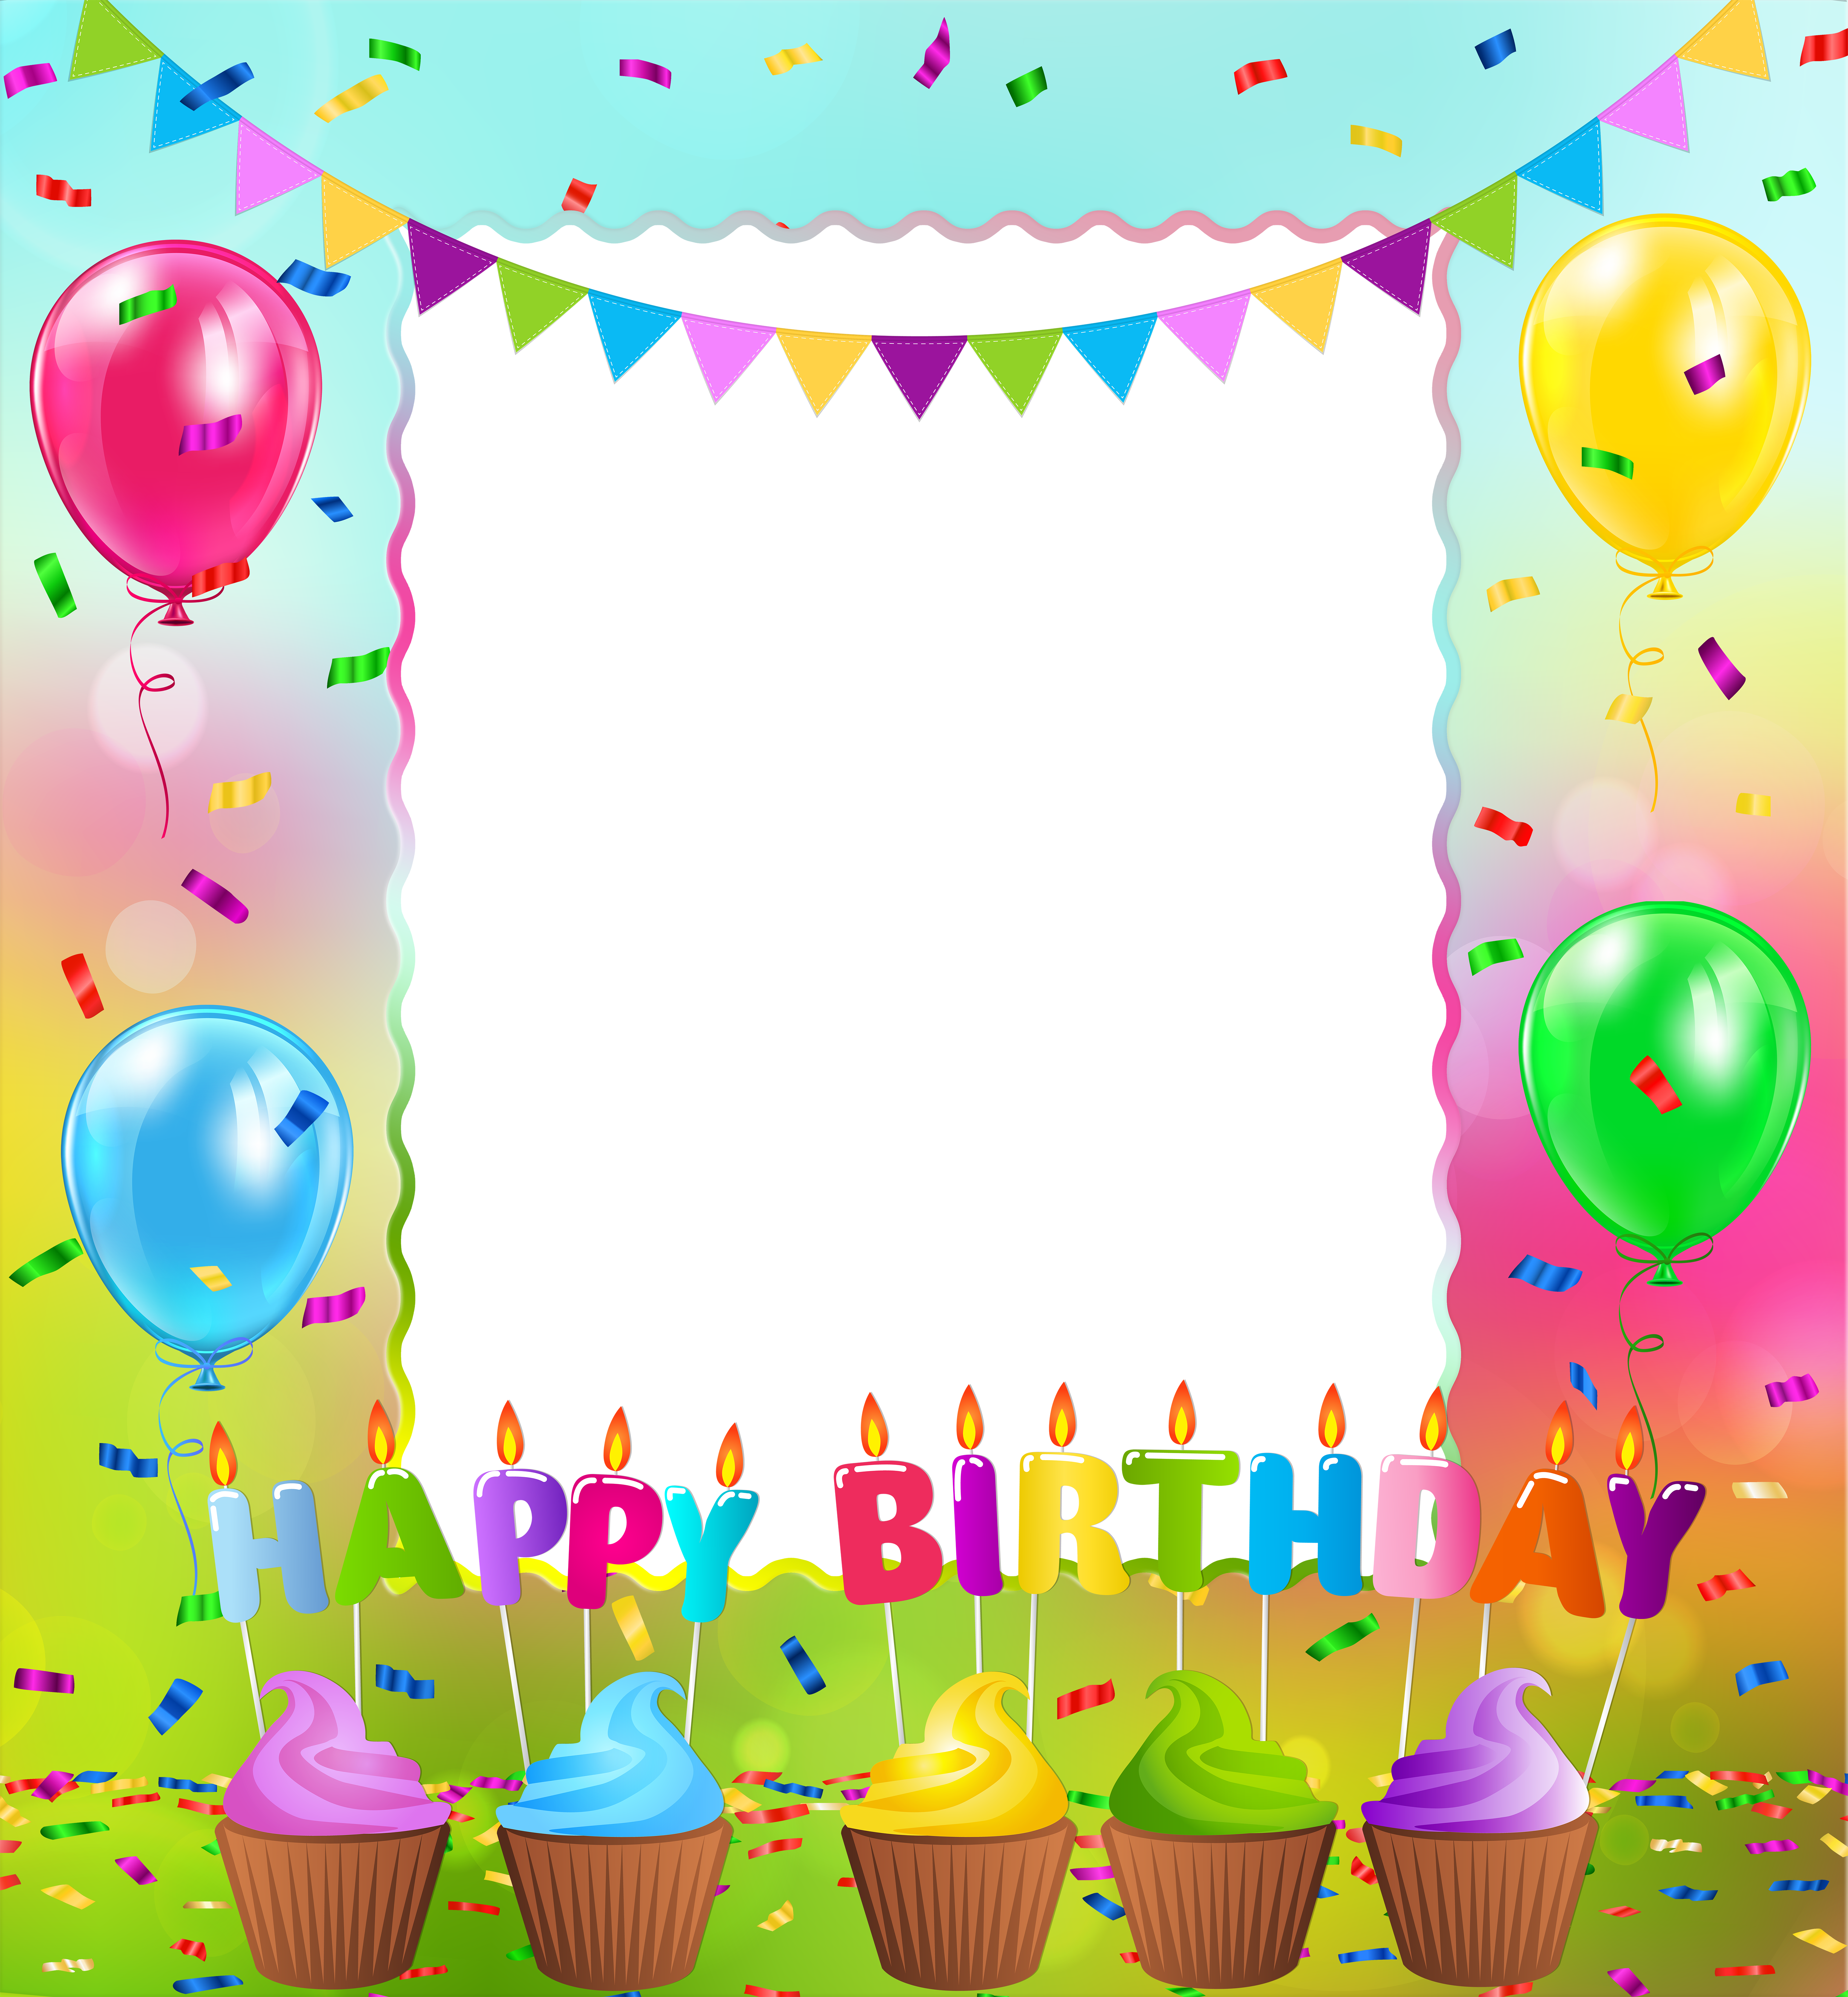 Happy Birthday Png Frame Gallery Yopriceville High Quality Images And Transparent Png Free Clipart